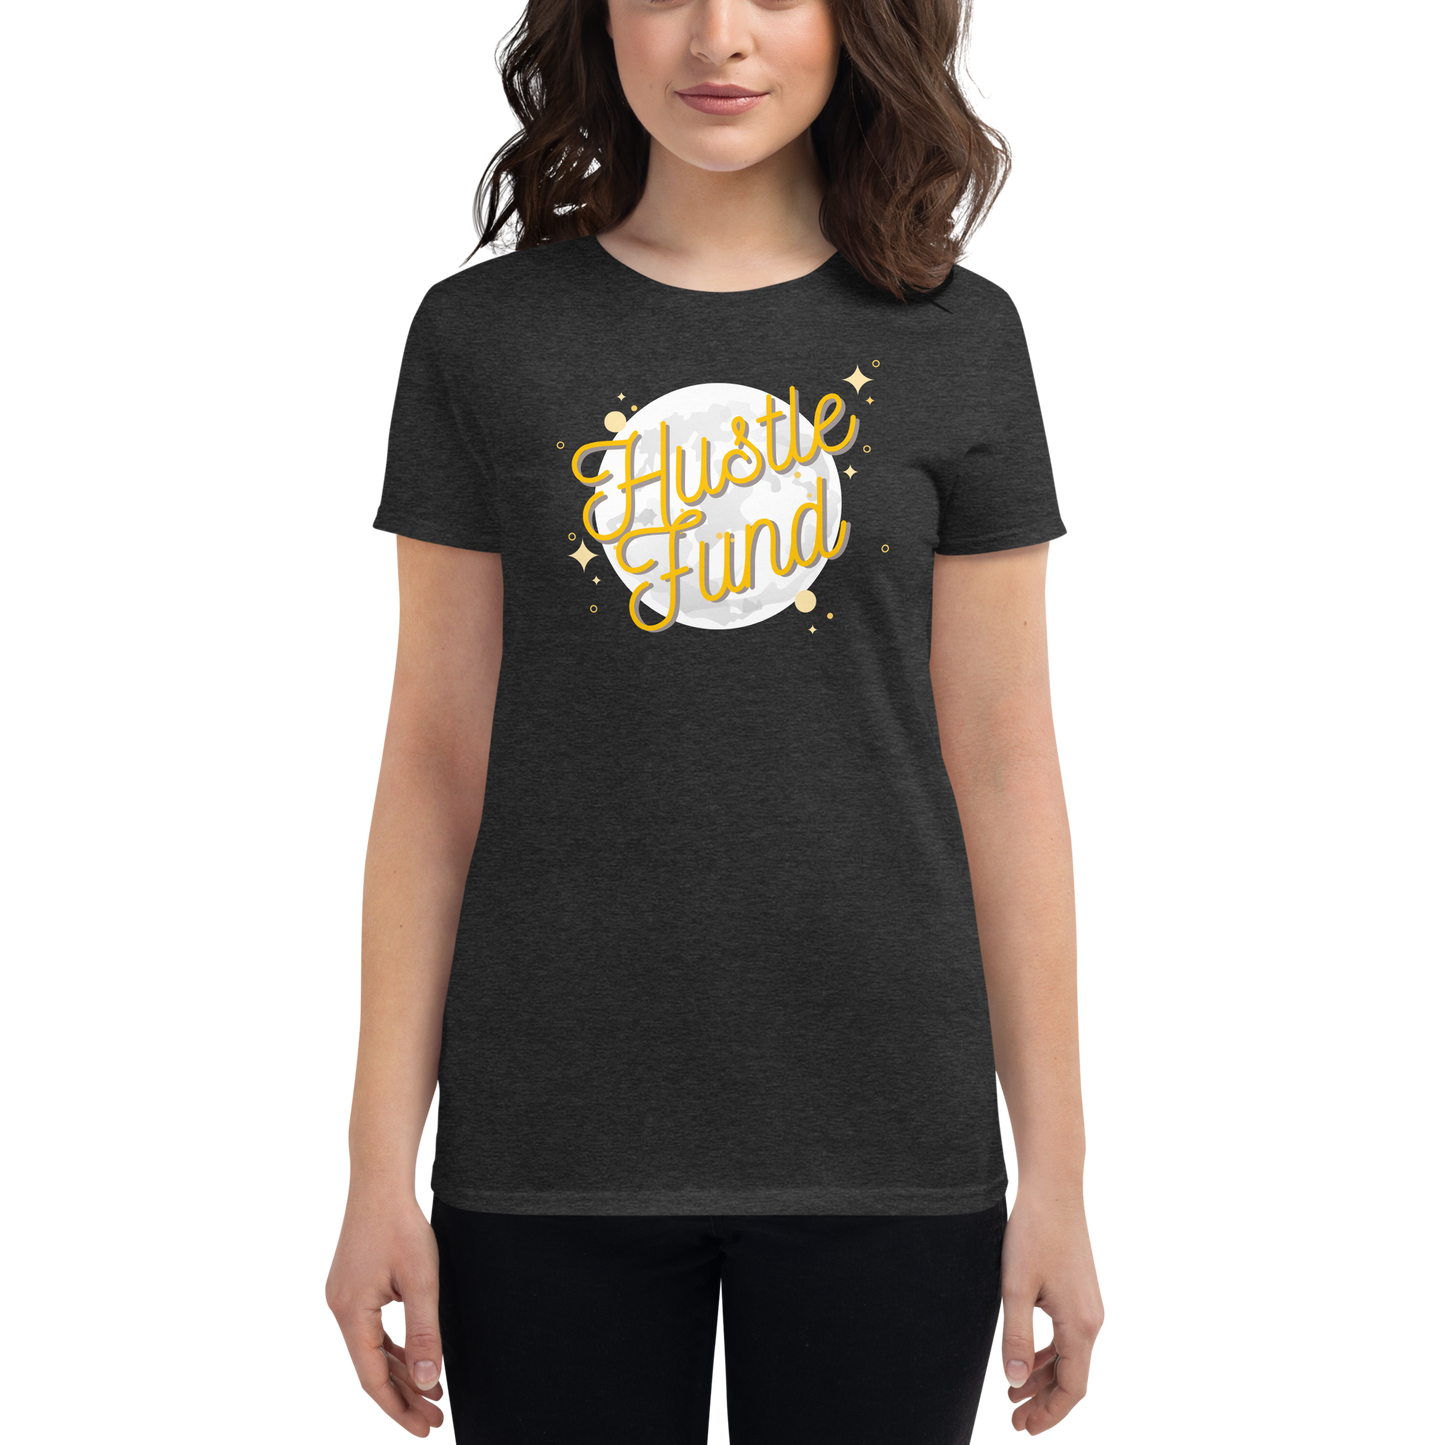 Over the Moon Hustle Fund Ladies' Pre-Shrunk T-Shirt